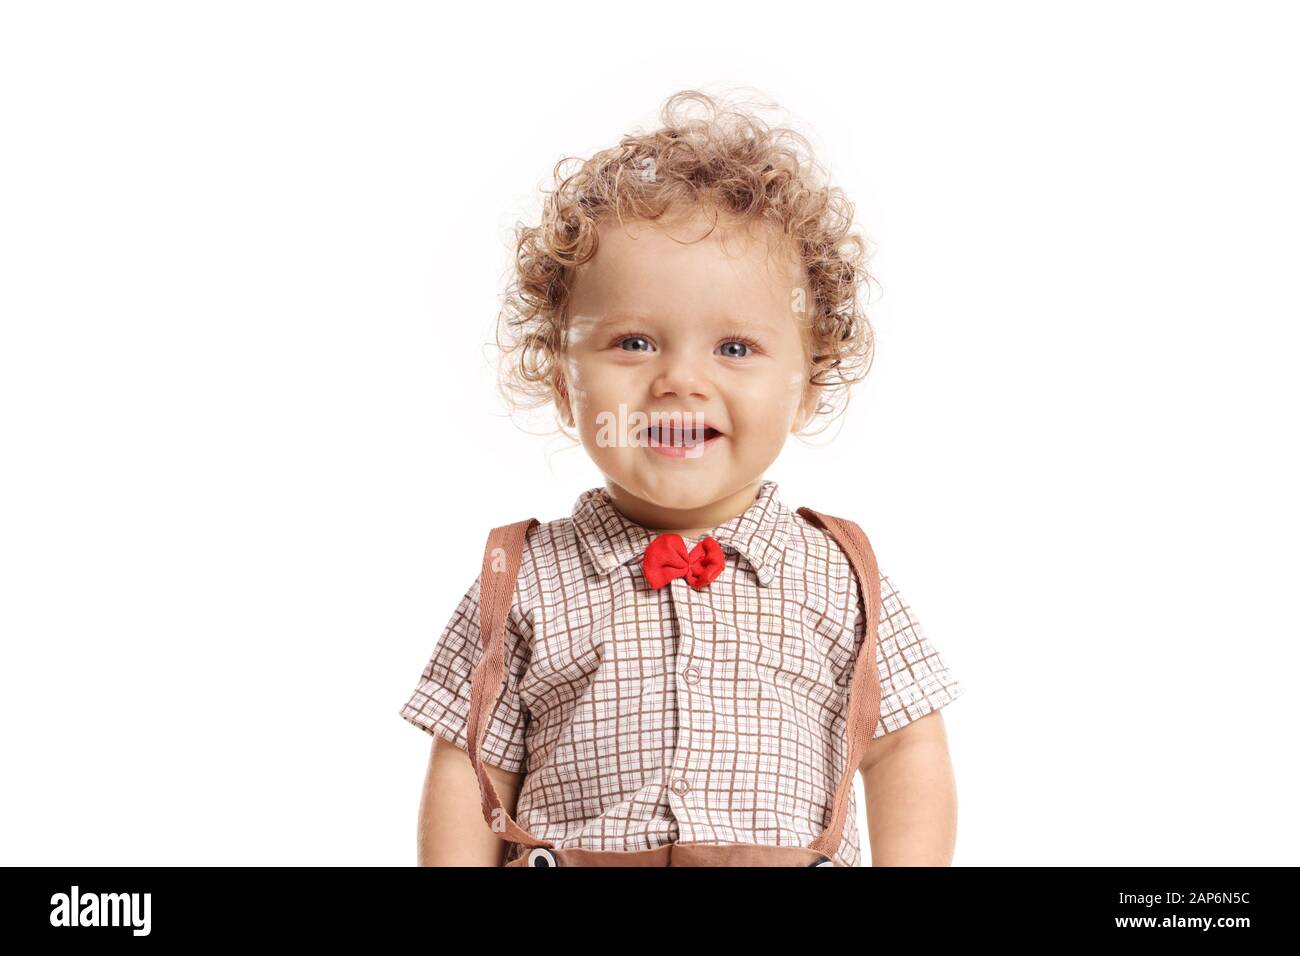 Baby boy with a bow tie isolated on white background Stock Photo